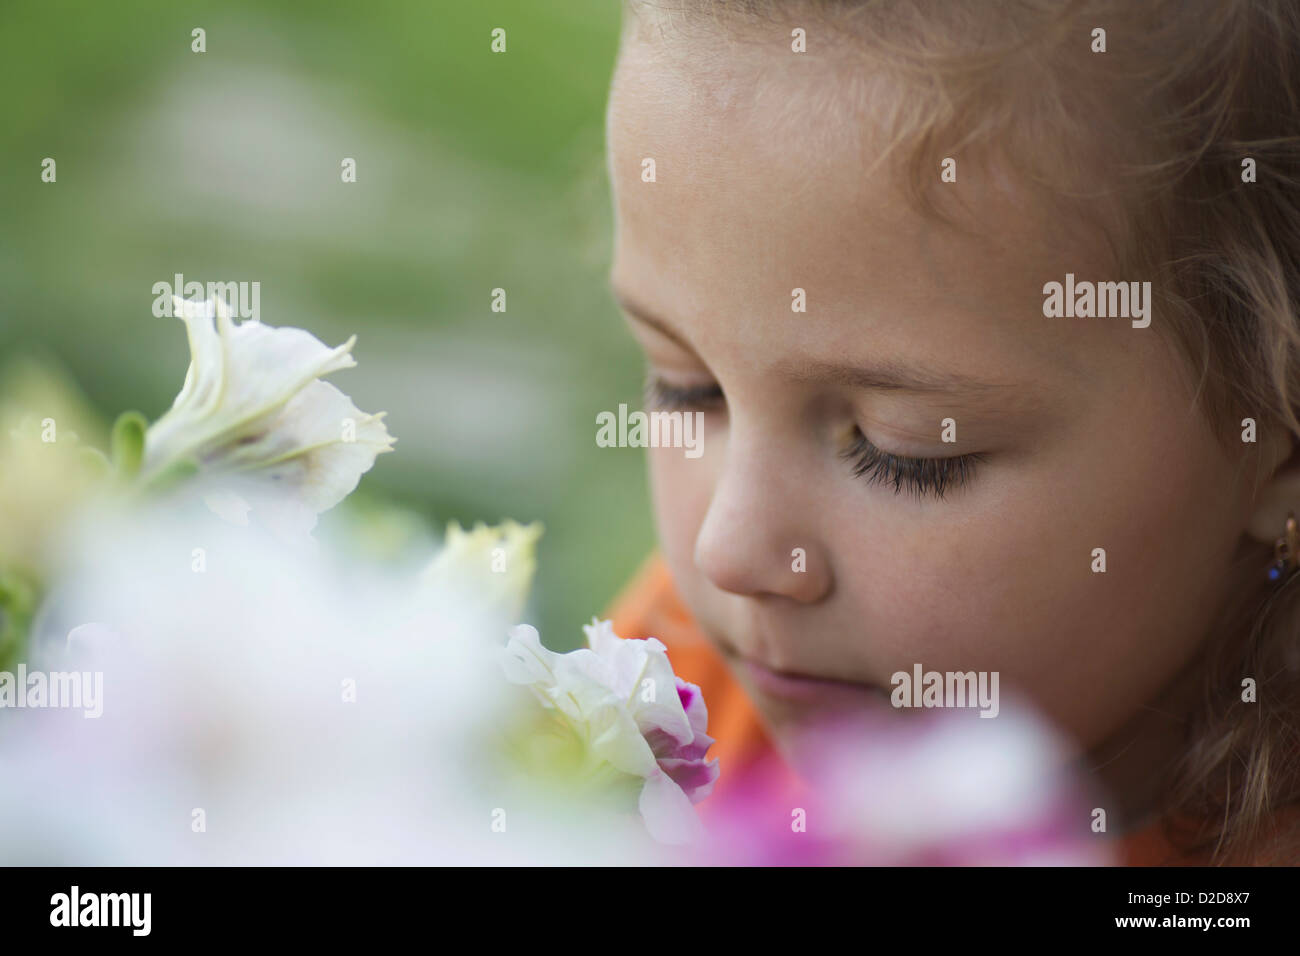 A young girl concentrating on smelling a flower Stock Photo